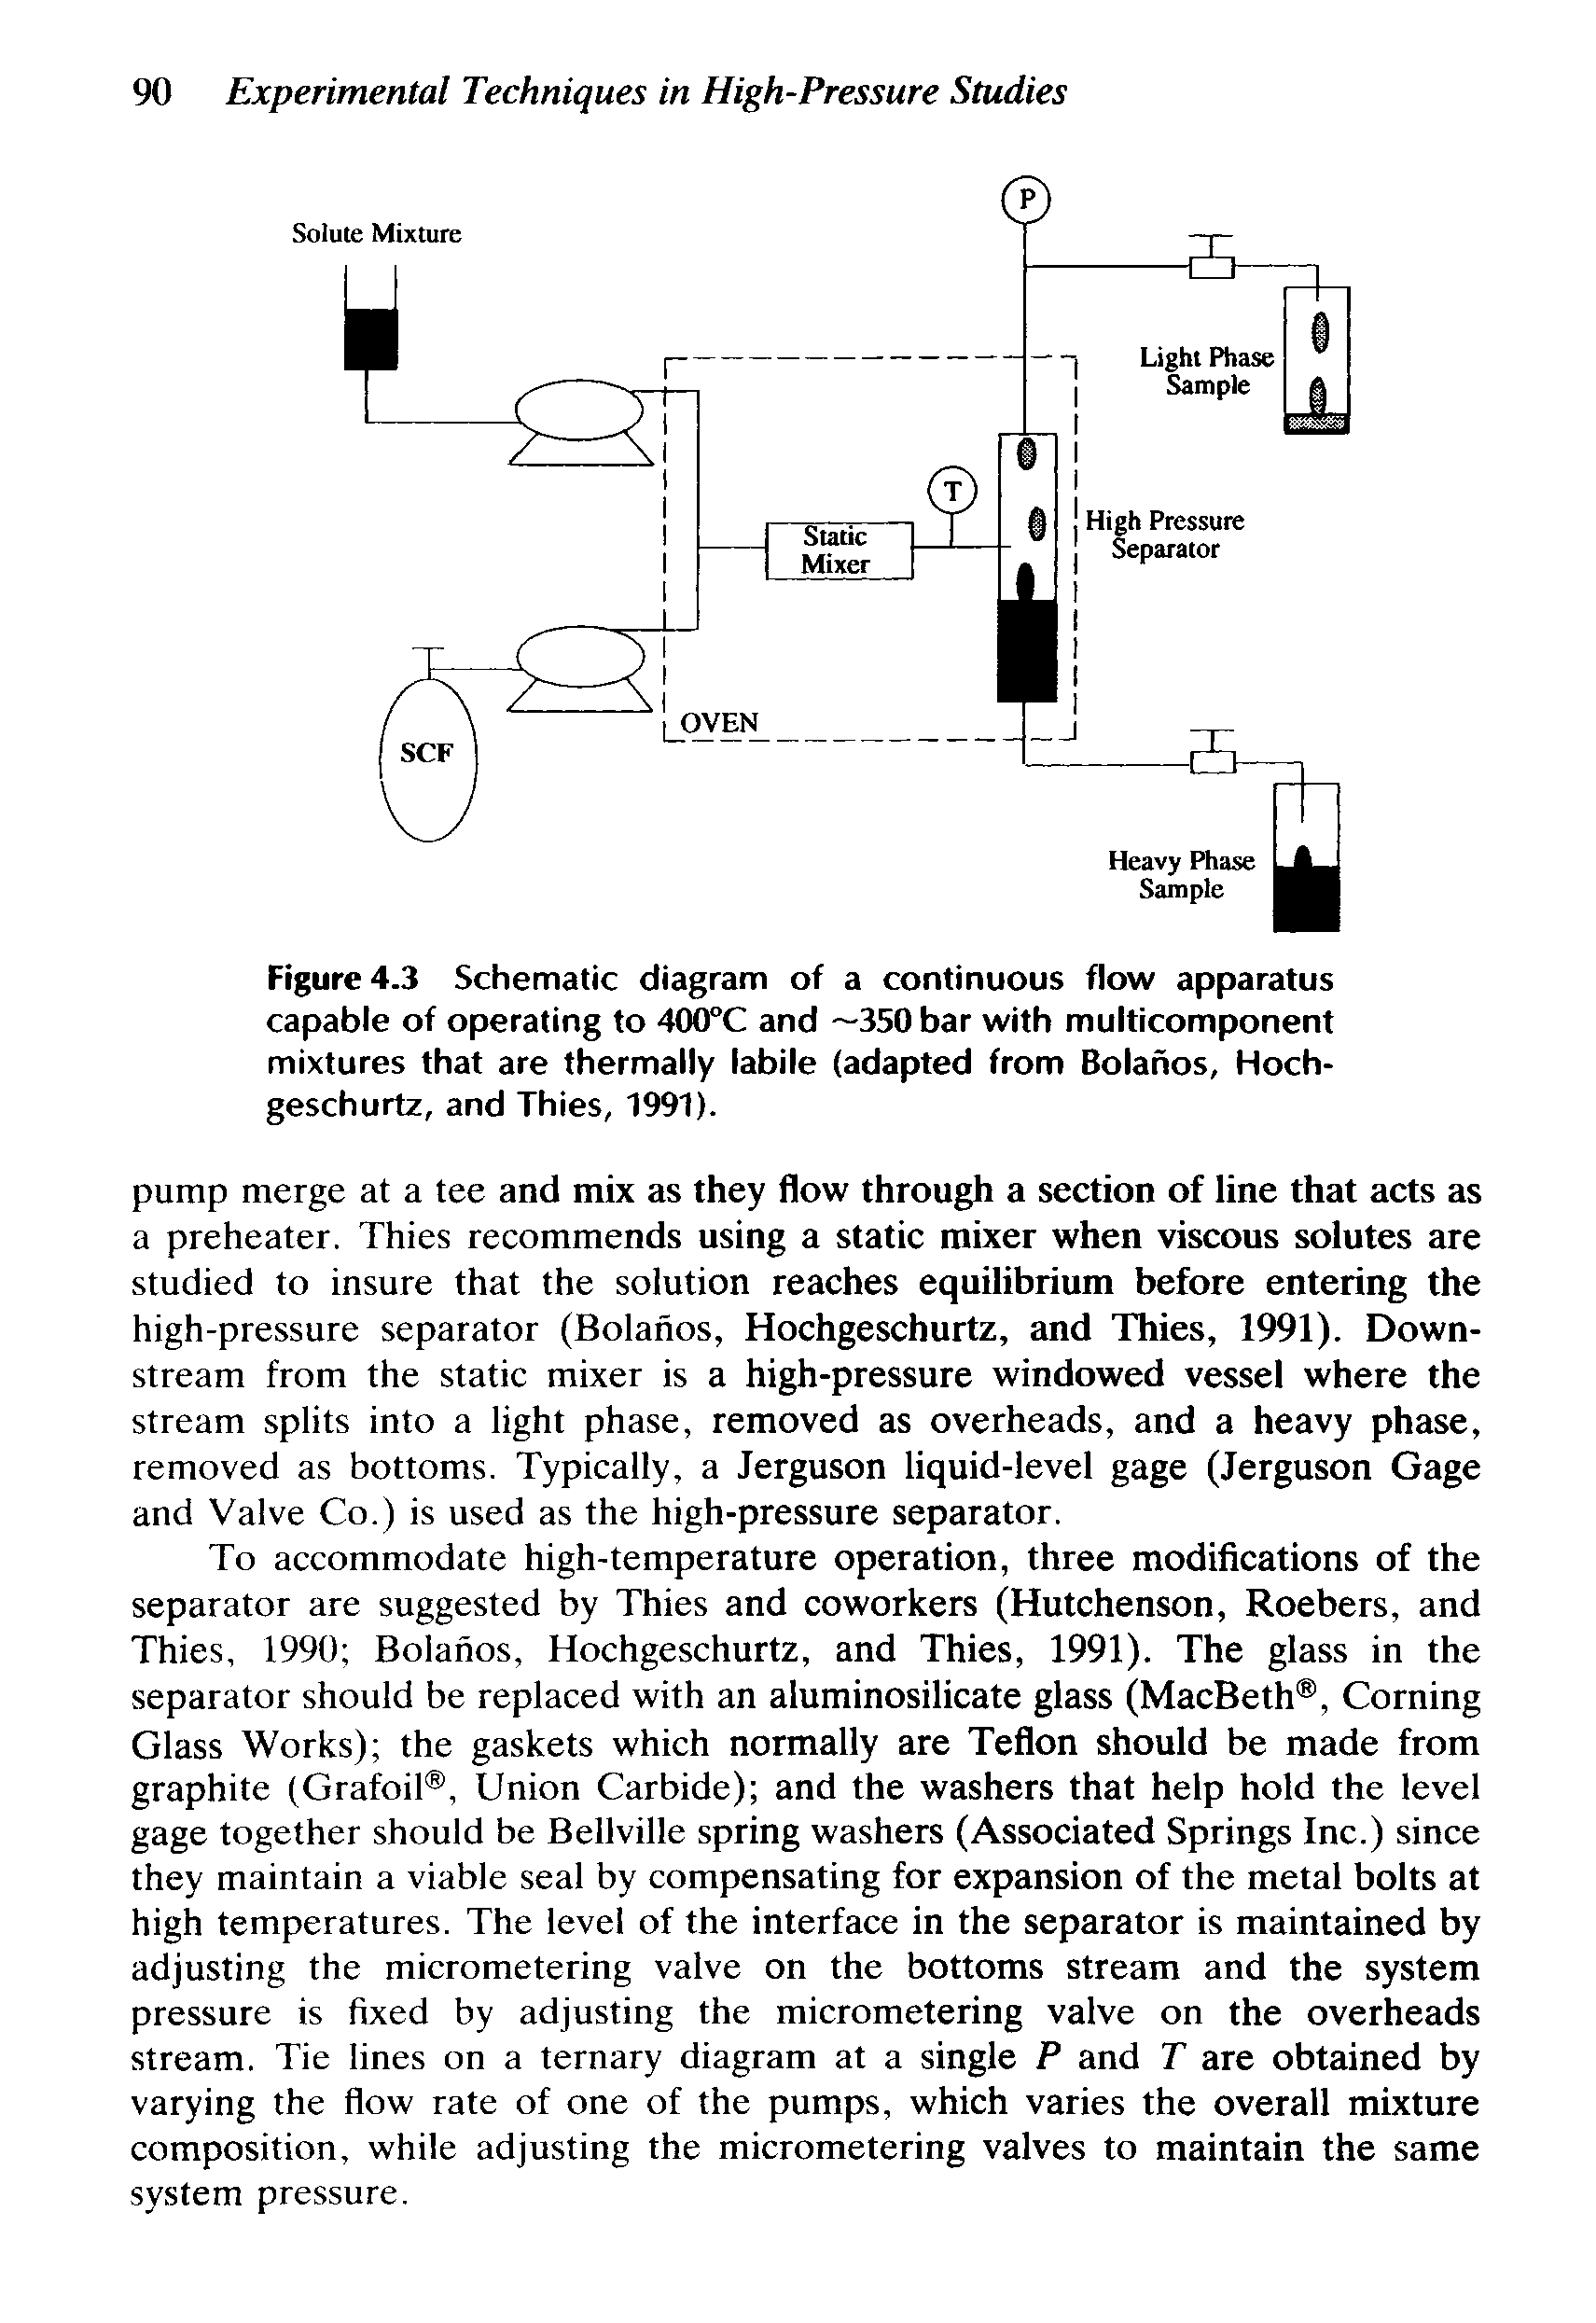 Figure 4.3 Schematic diagram of a continuous flow apparatus capable of operating to 400°C and —350 bar with multicomponent mixtures that are thermally labile (adapted from Bolahos, Hoch-geschurtz, and Thies, 1991).